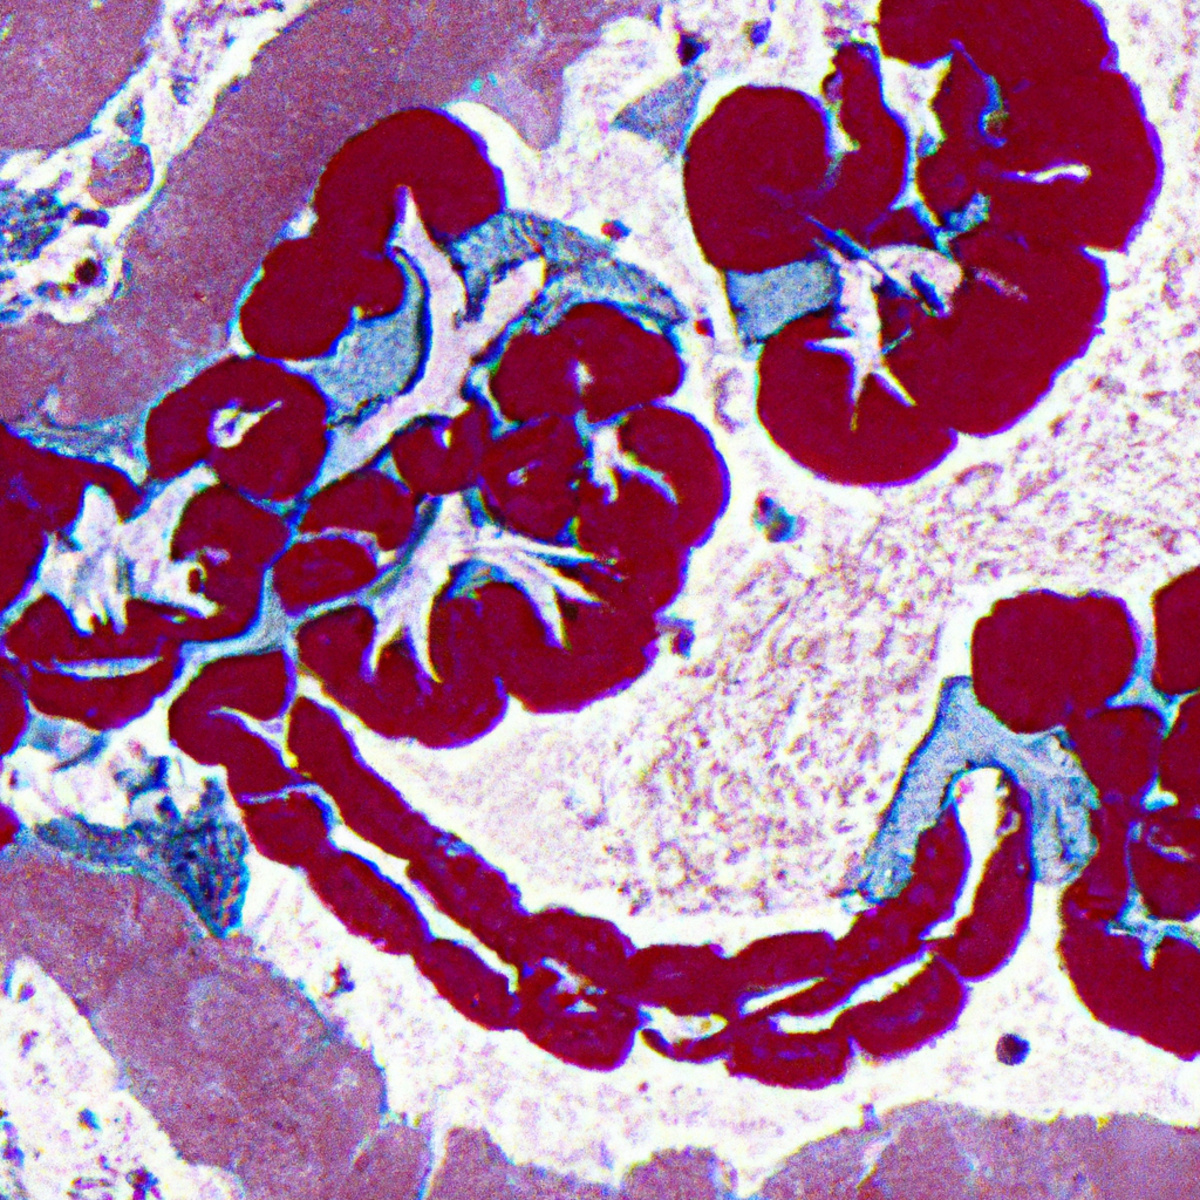 Close-up of a healthy, vibrant pancreas with intricate blood vessels, inviting readers to explore Nesidioblastosis.